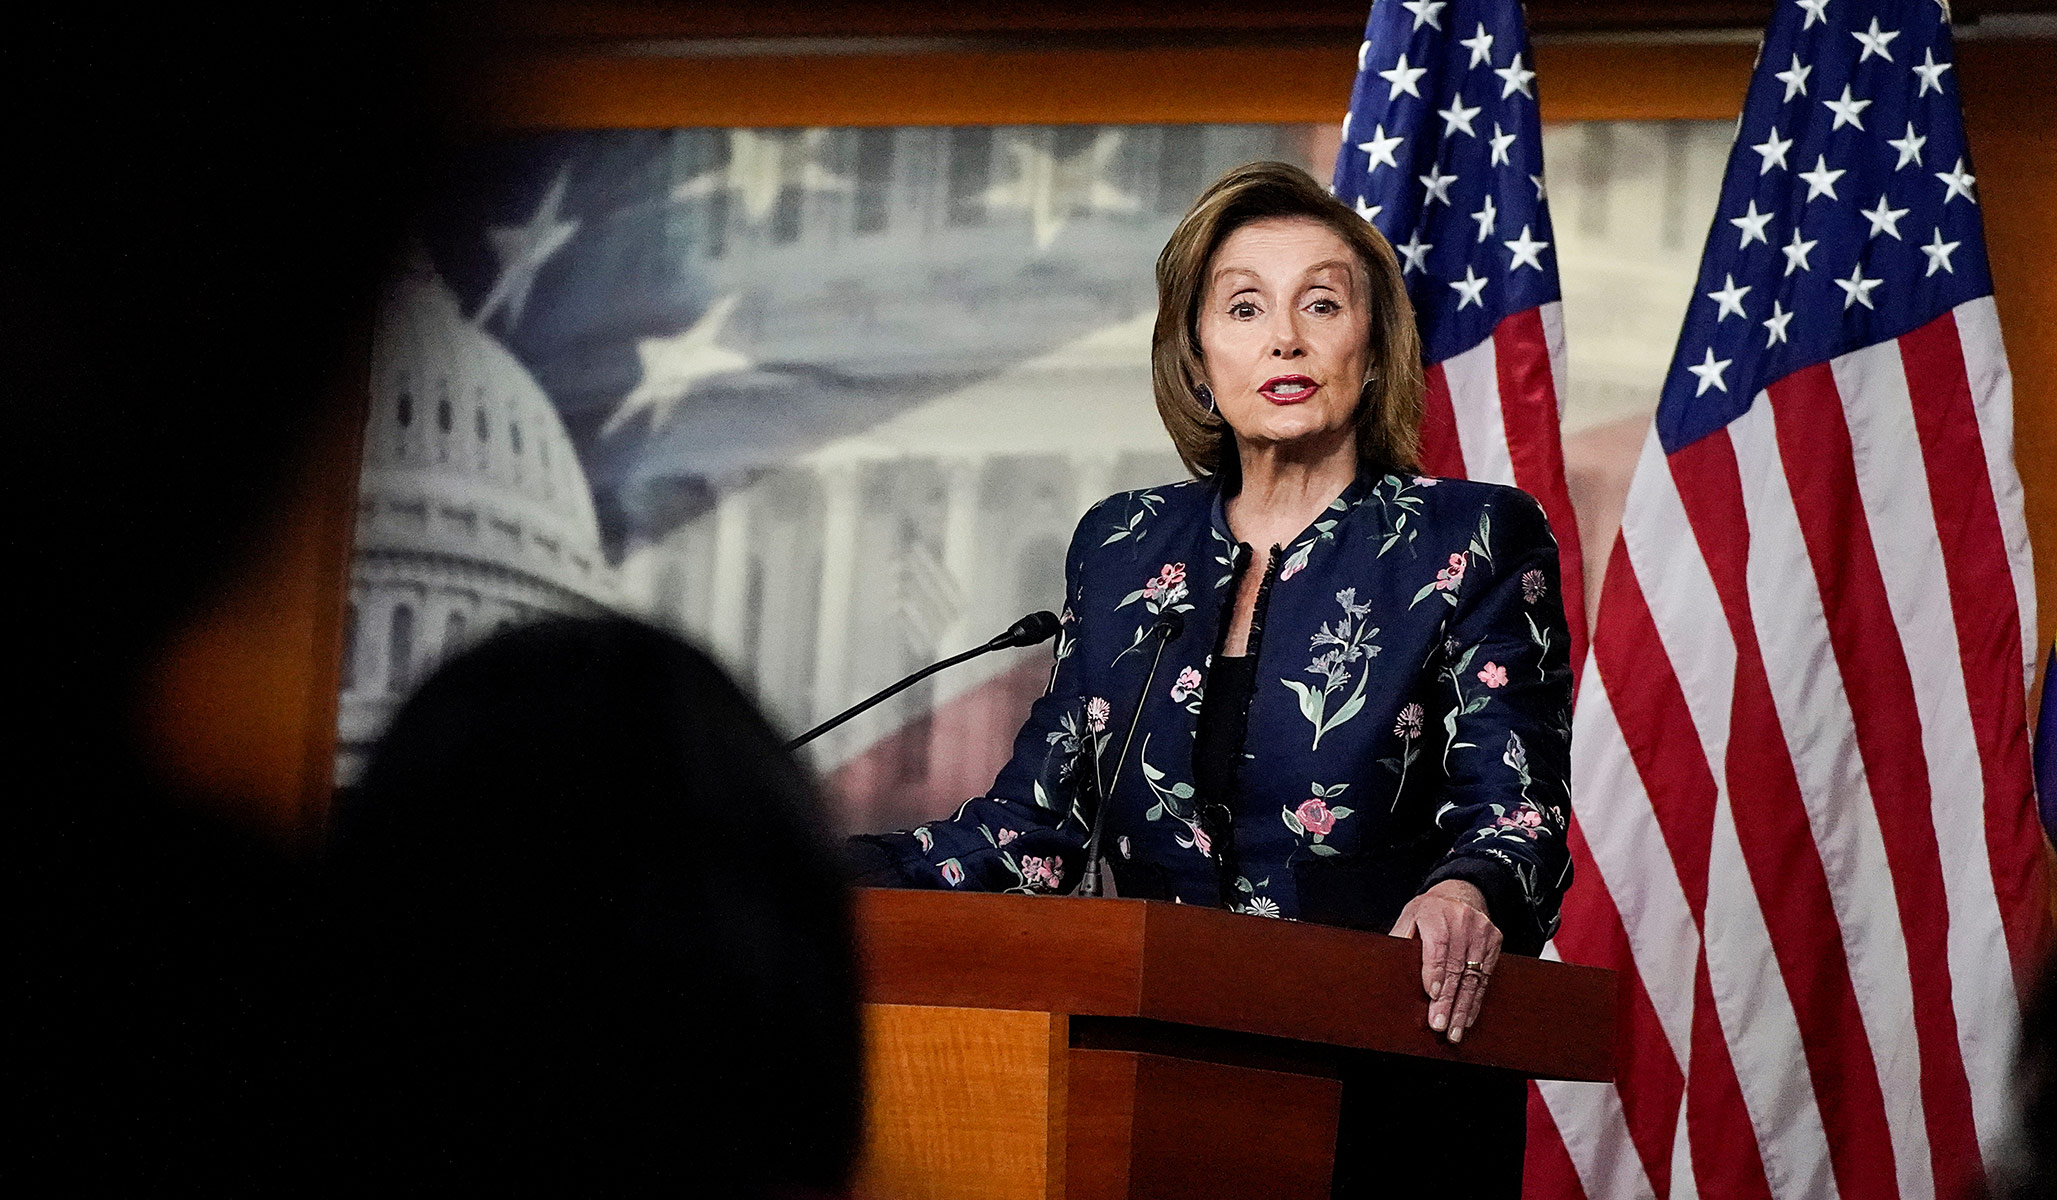 Pelosi Announces She Will Run for Reelection